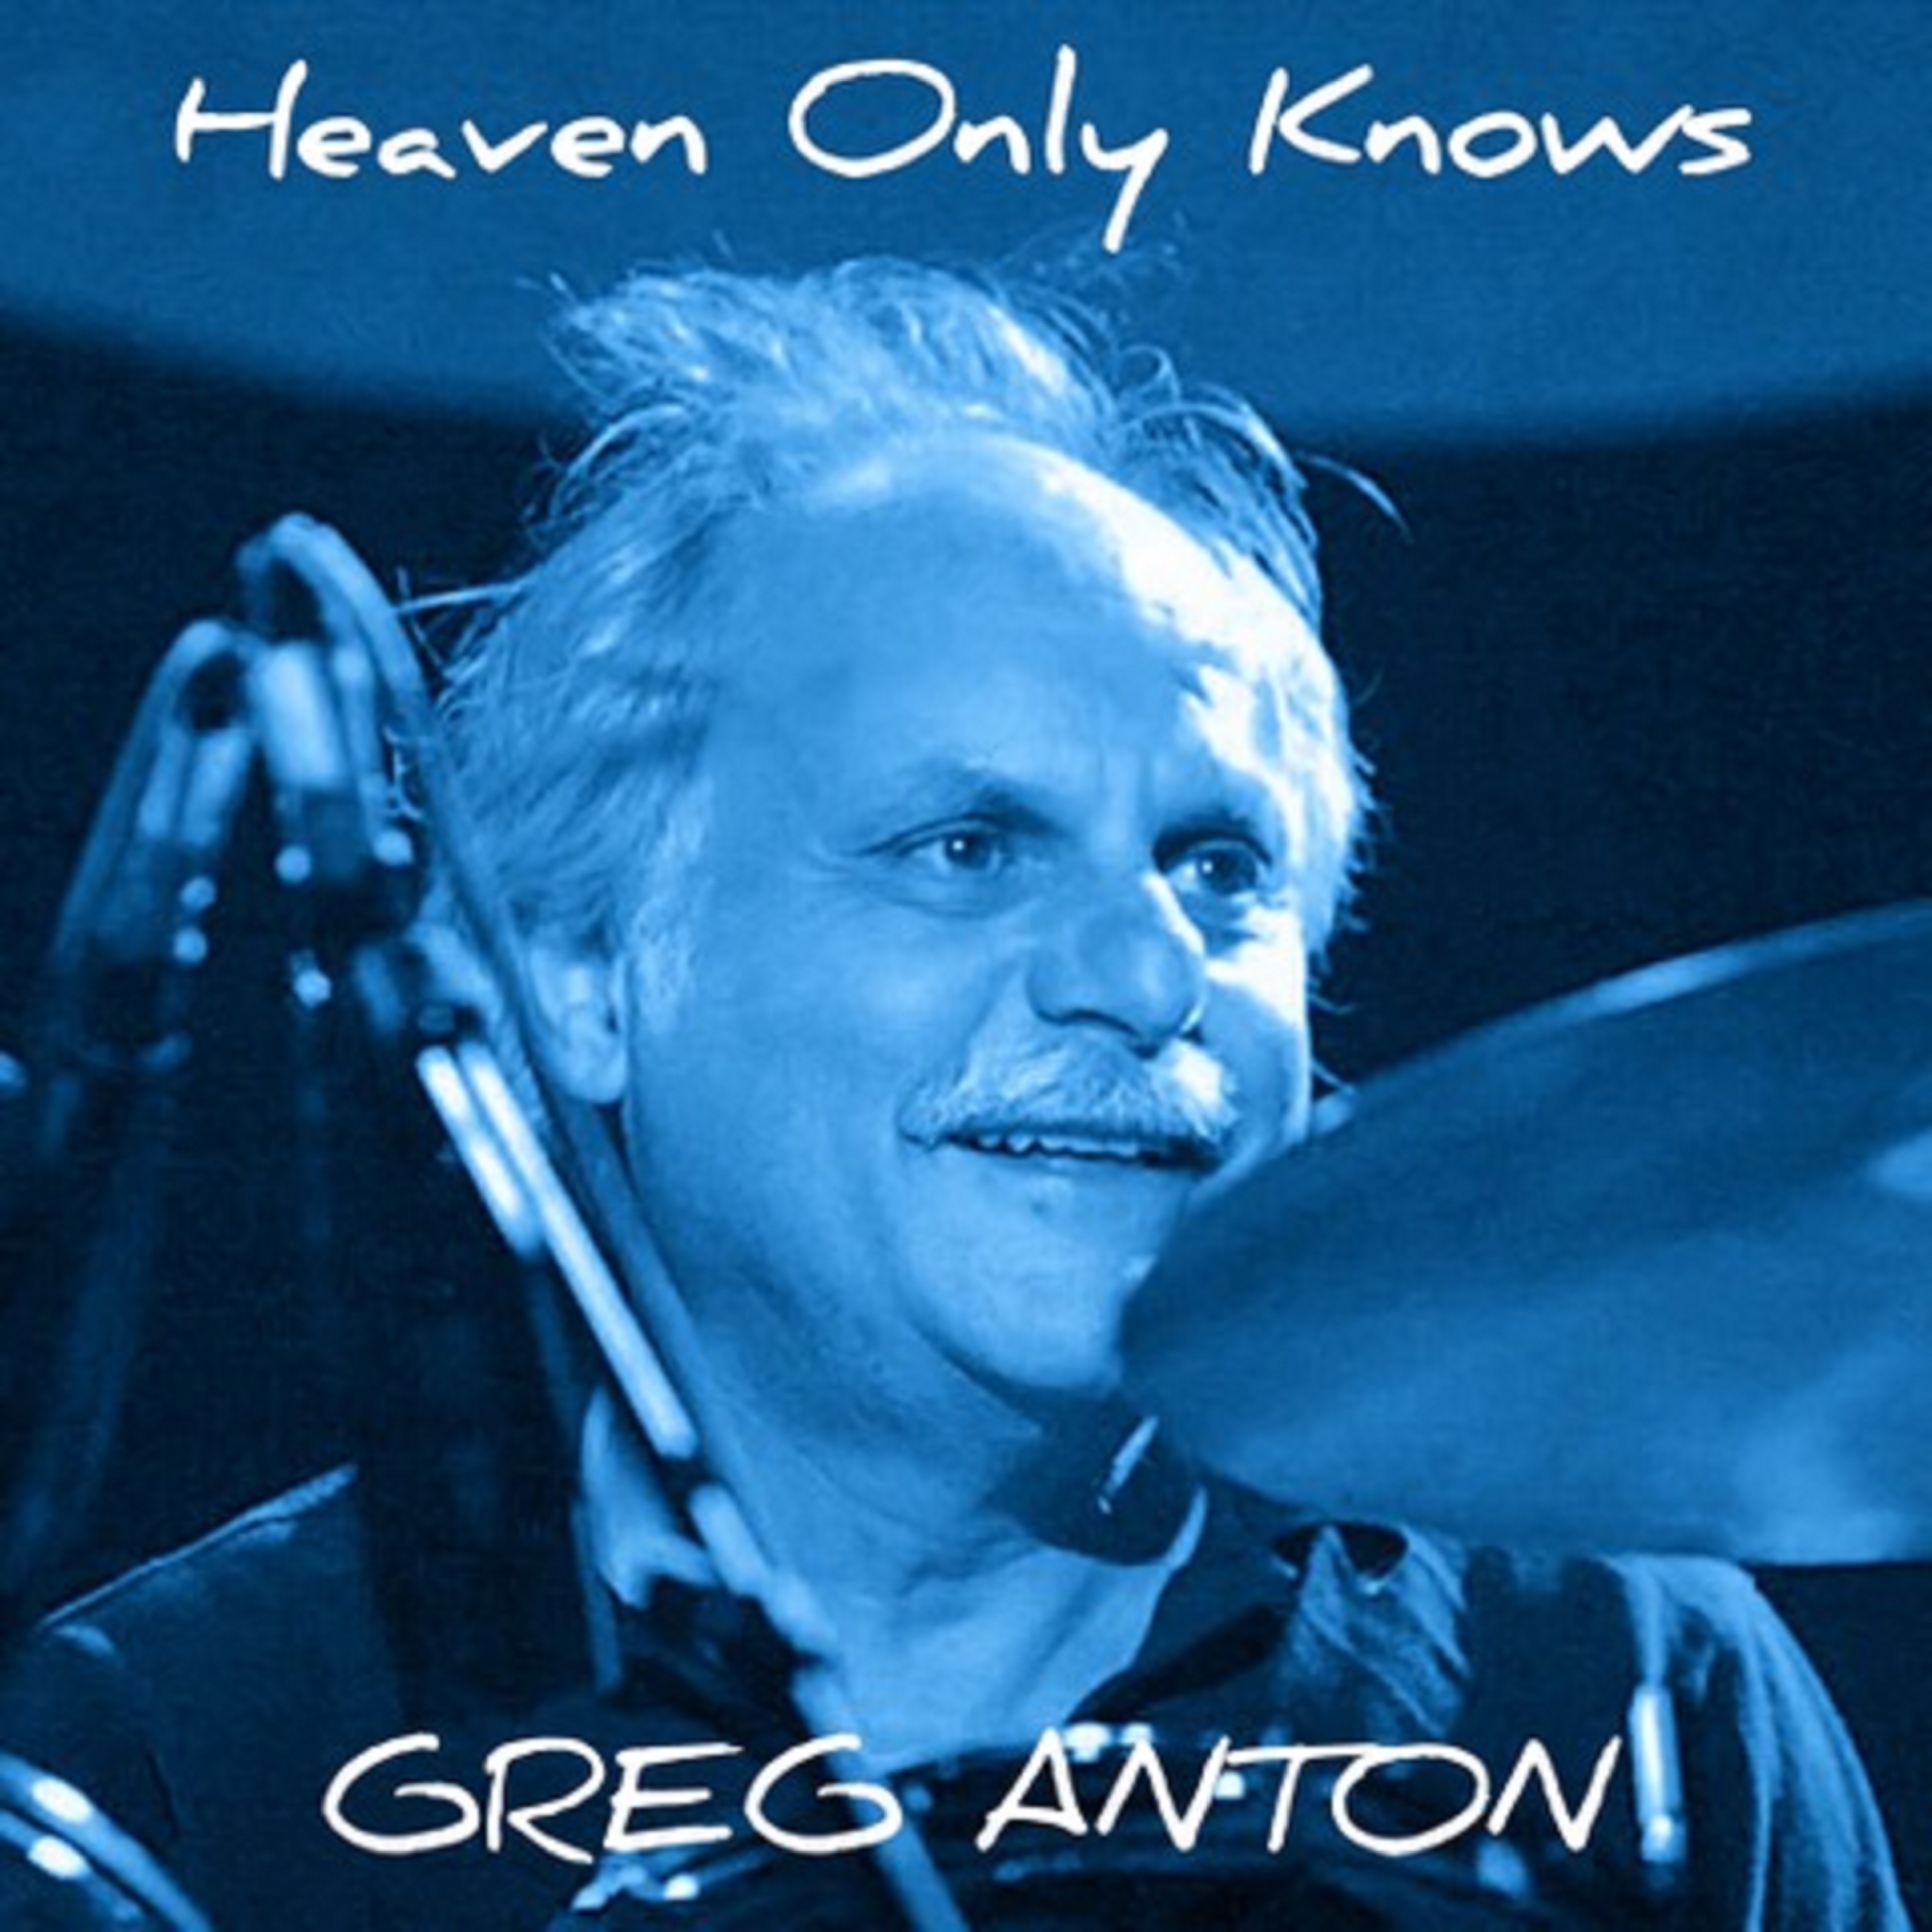 Greg Anton | "Heaven Only Knows" | Review